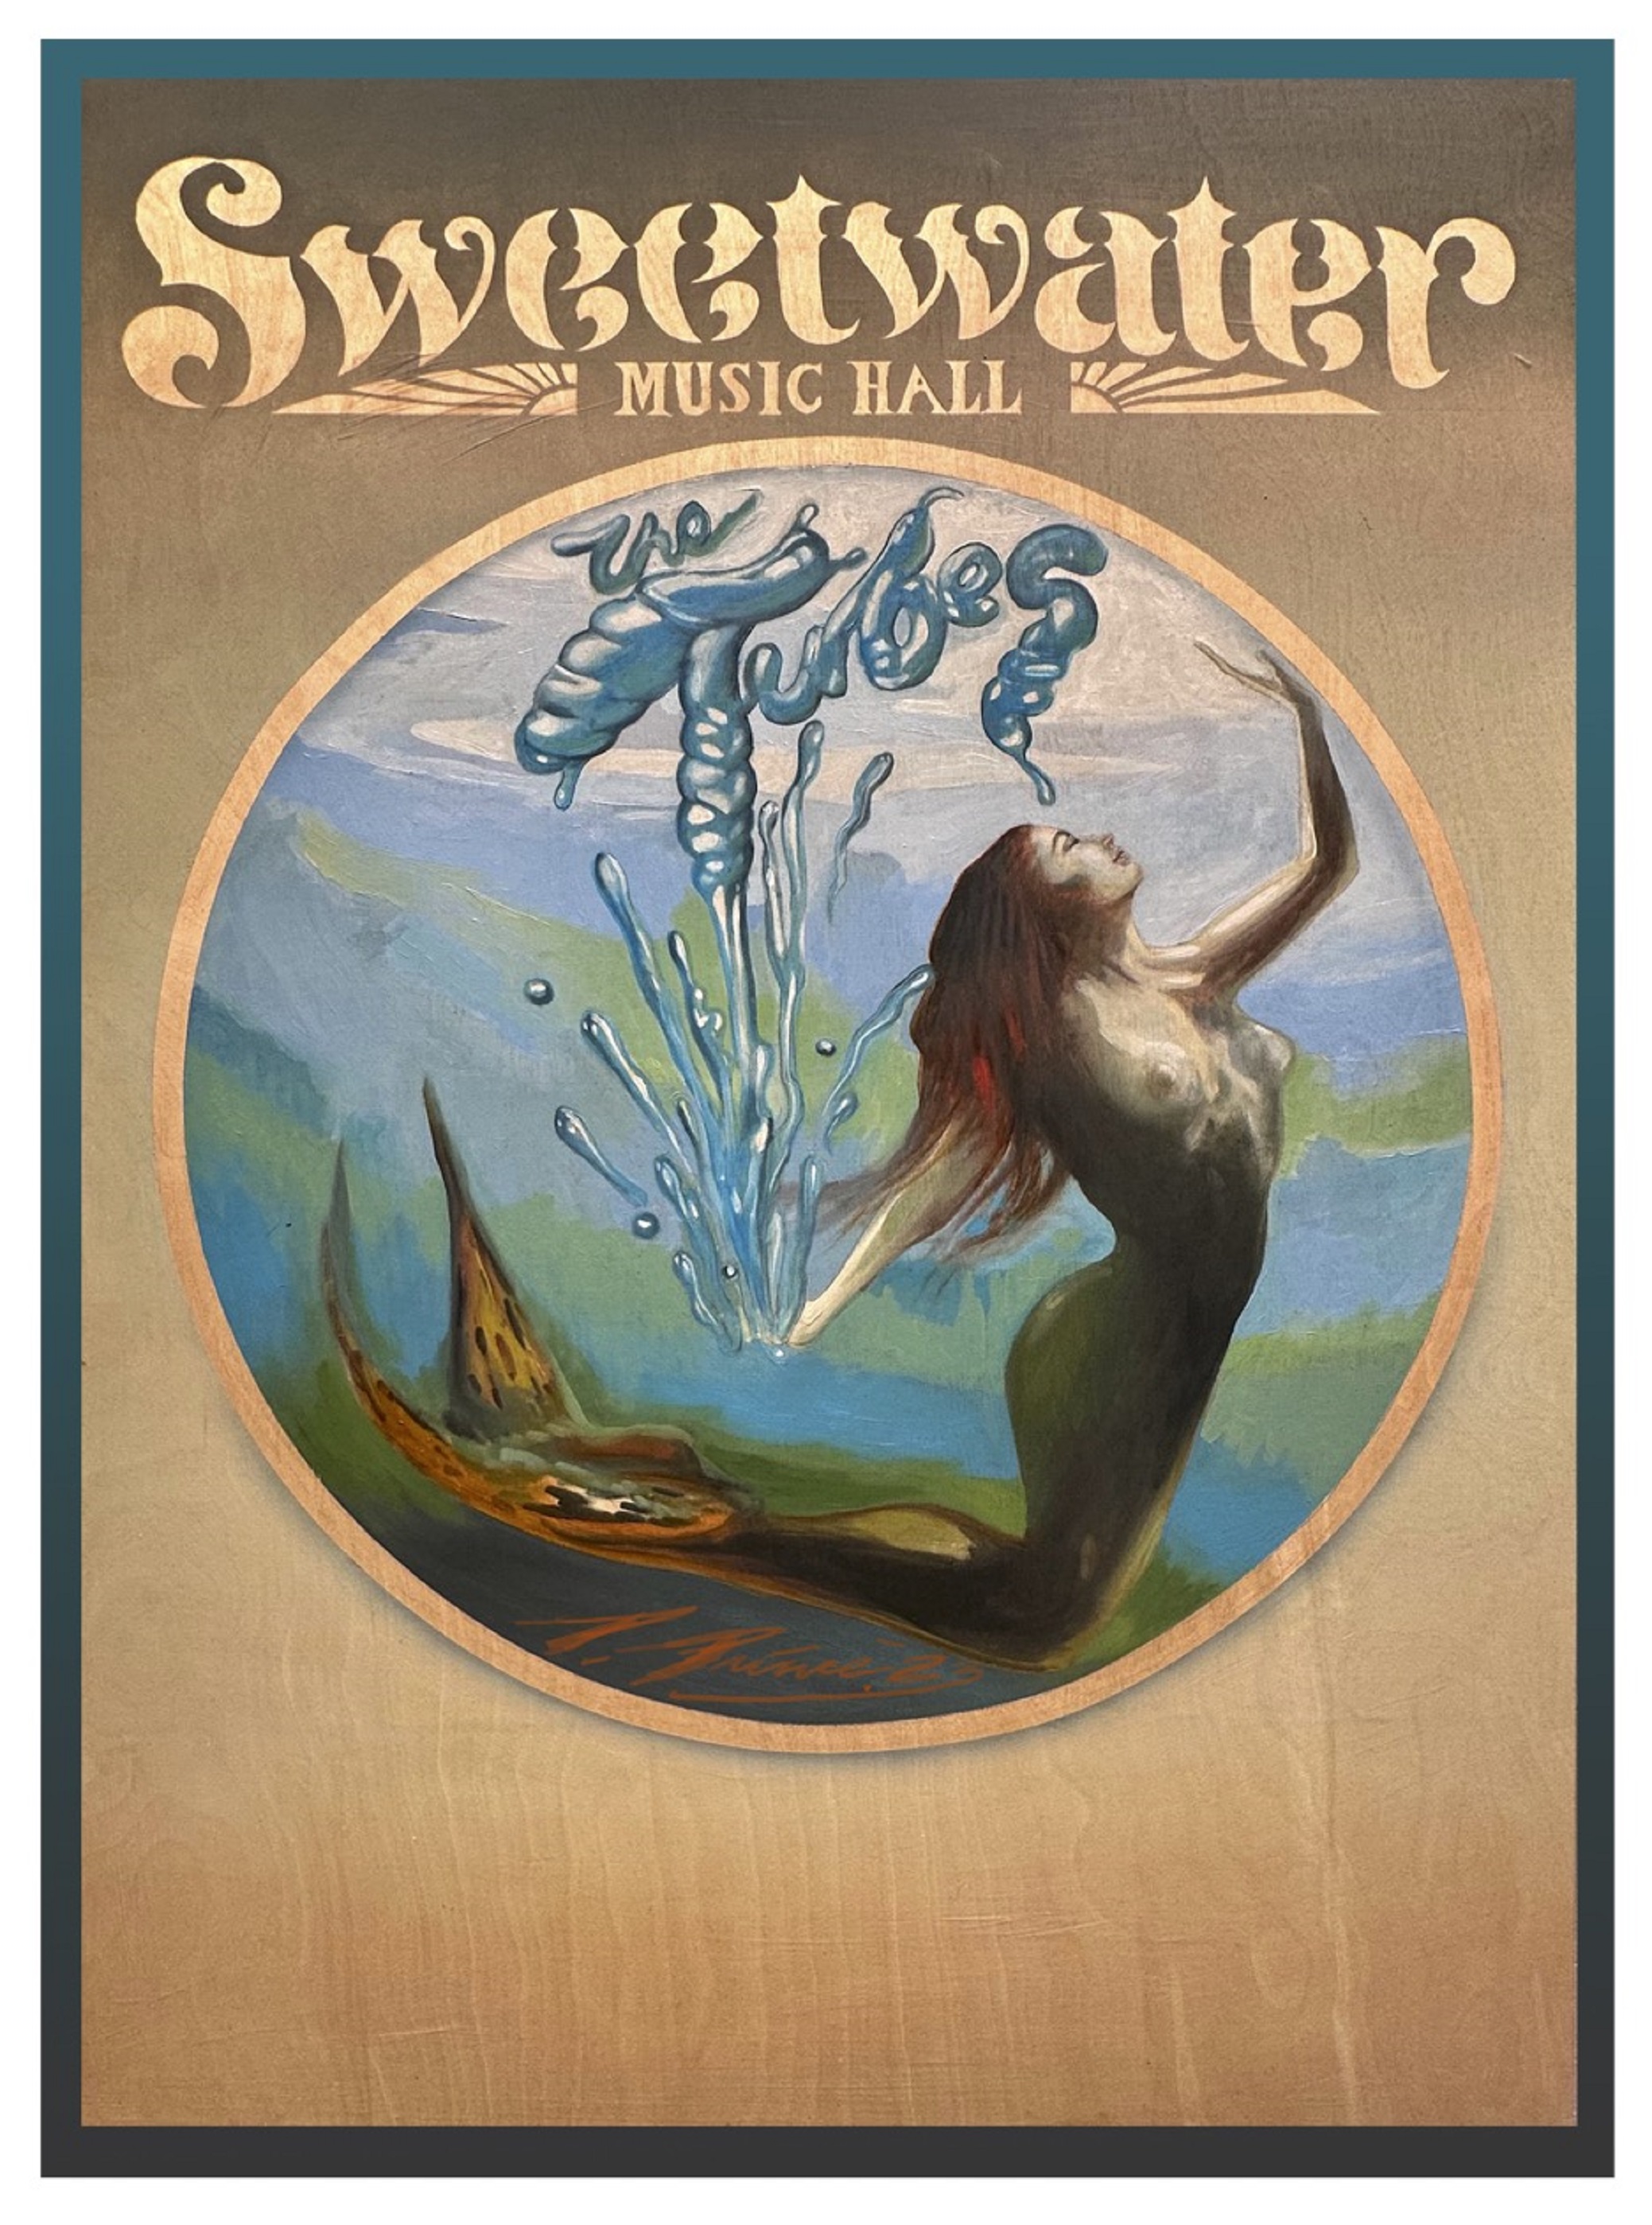 Legendary Northern California Music Venue Sweetwater Music Hall Celebrates 51st Anniversary With The Tubes & DJ Logic